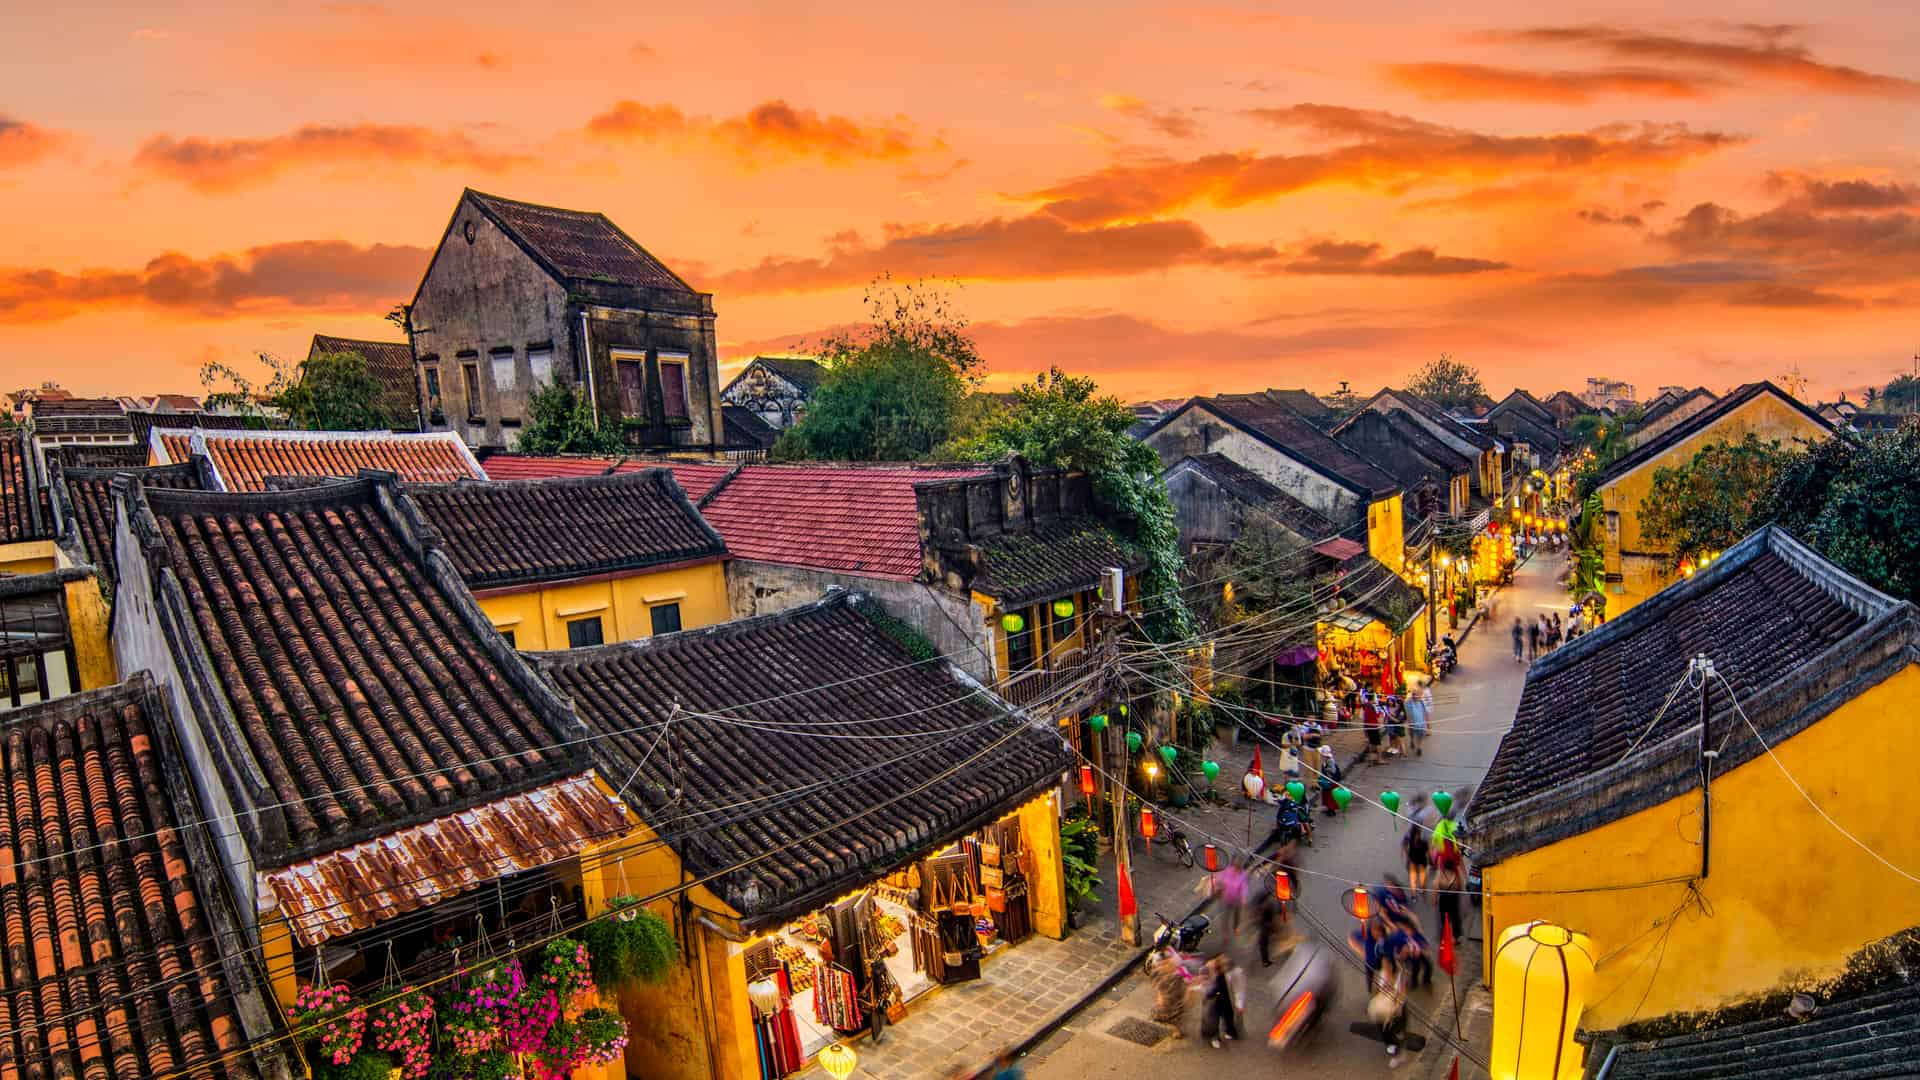 View of Hoi An, Vietnam old town at dawn